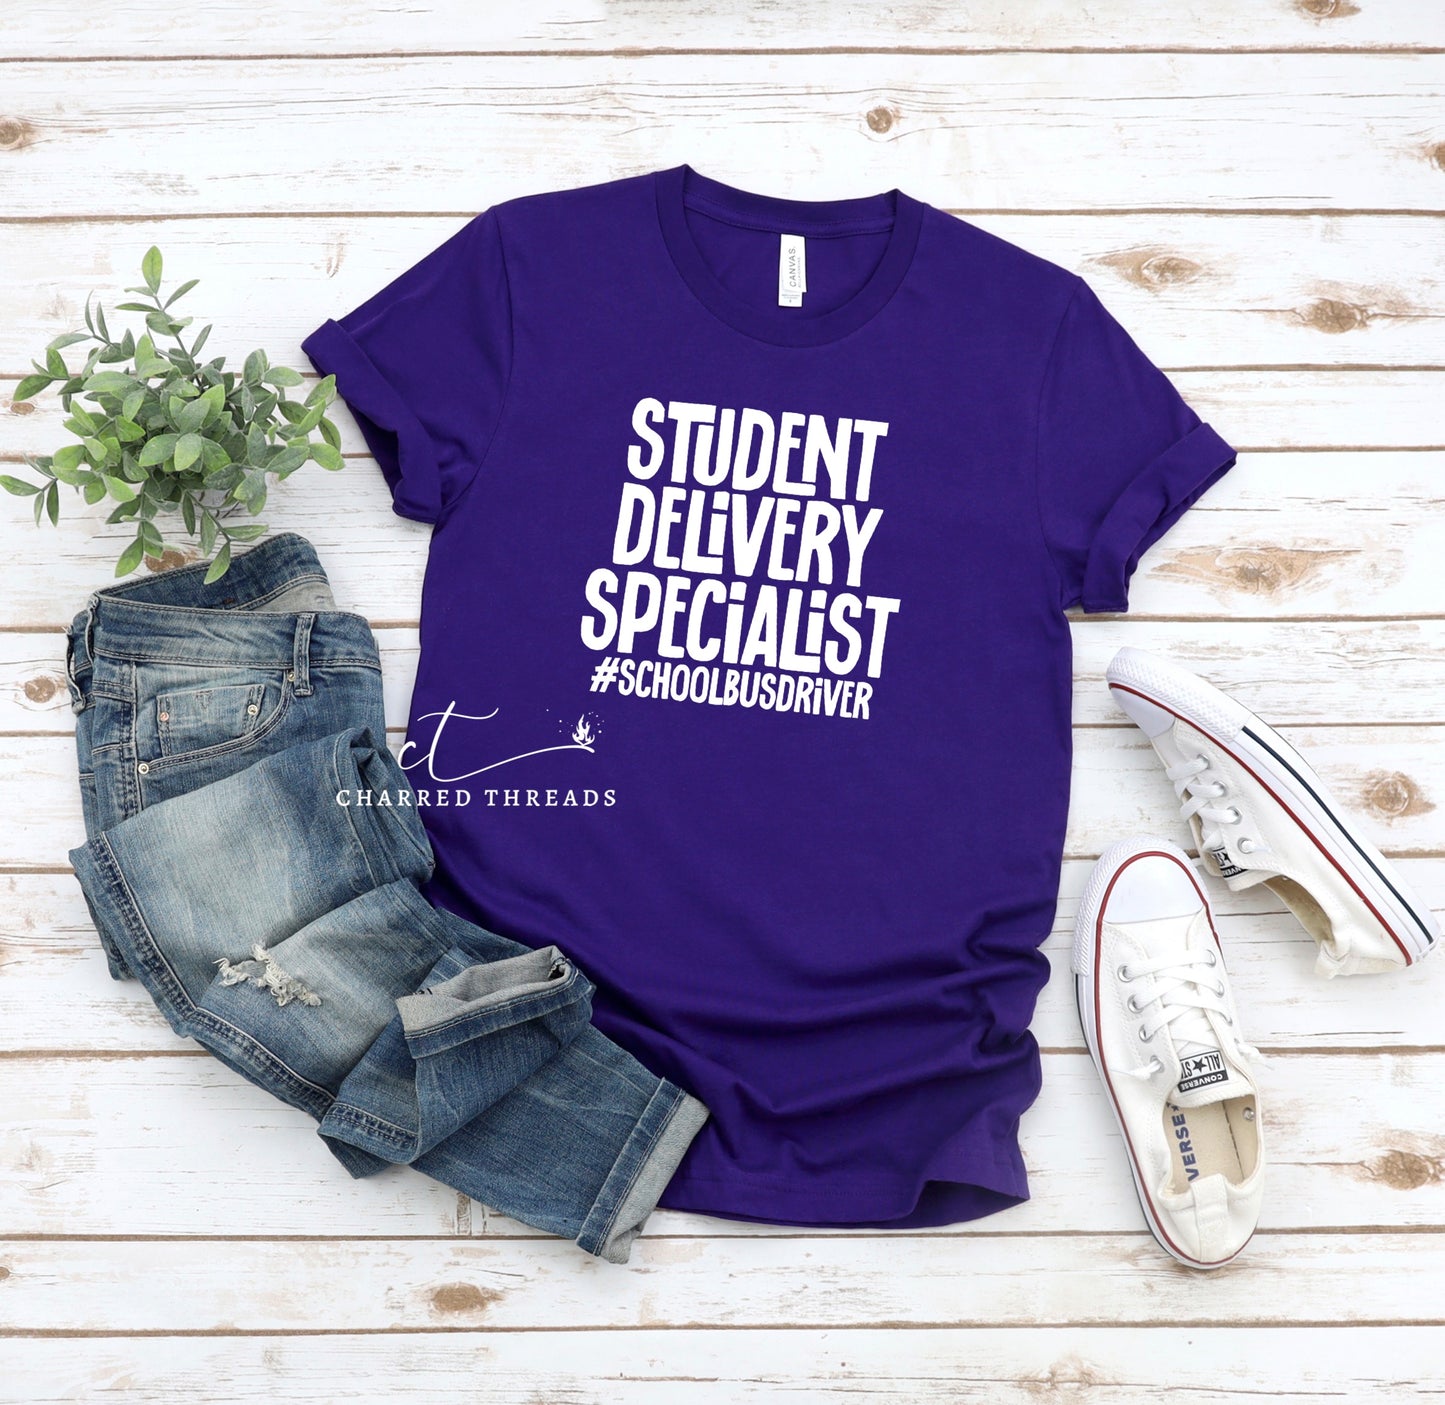 Student Delivery Specialist #schoolbusdriver Short Sleeve Shirt